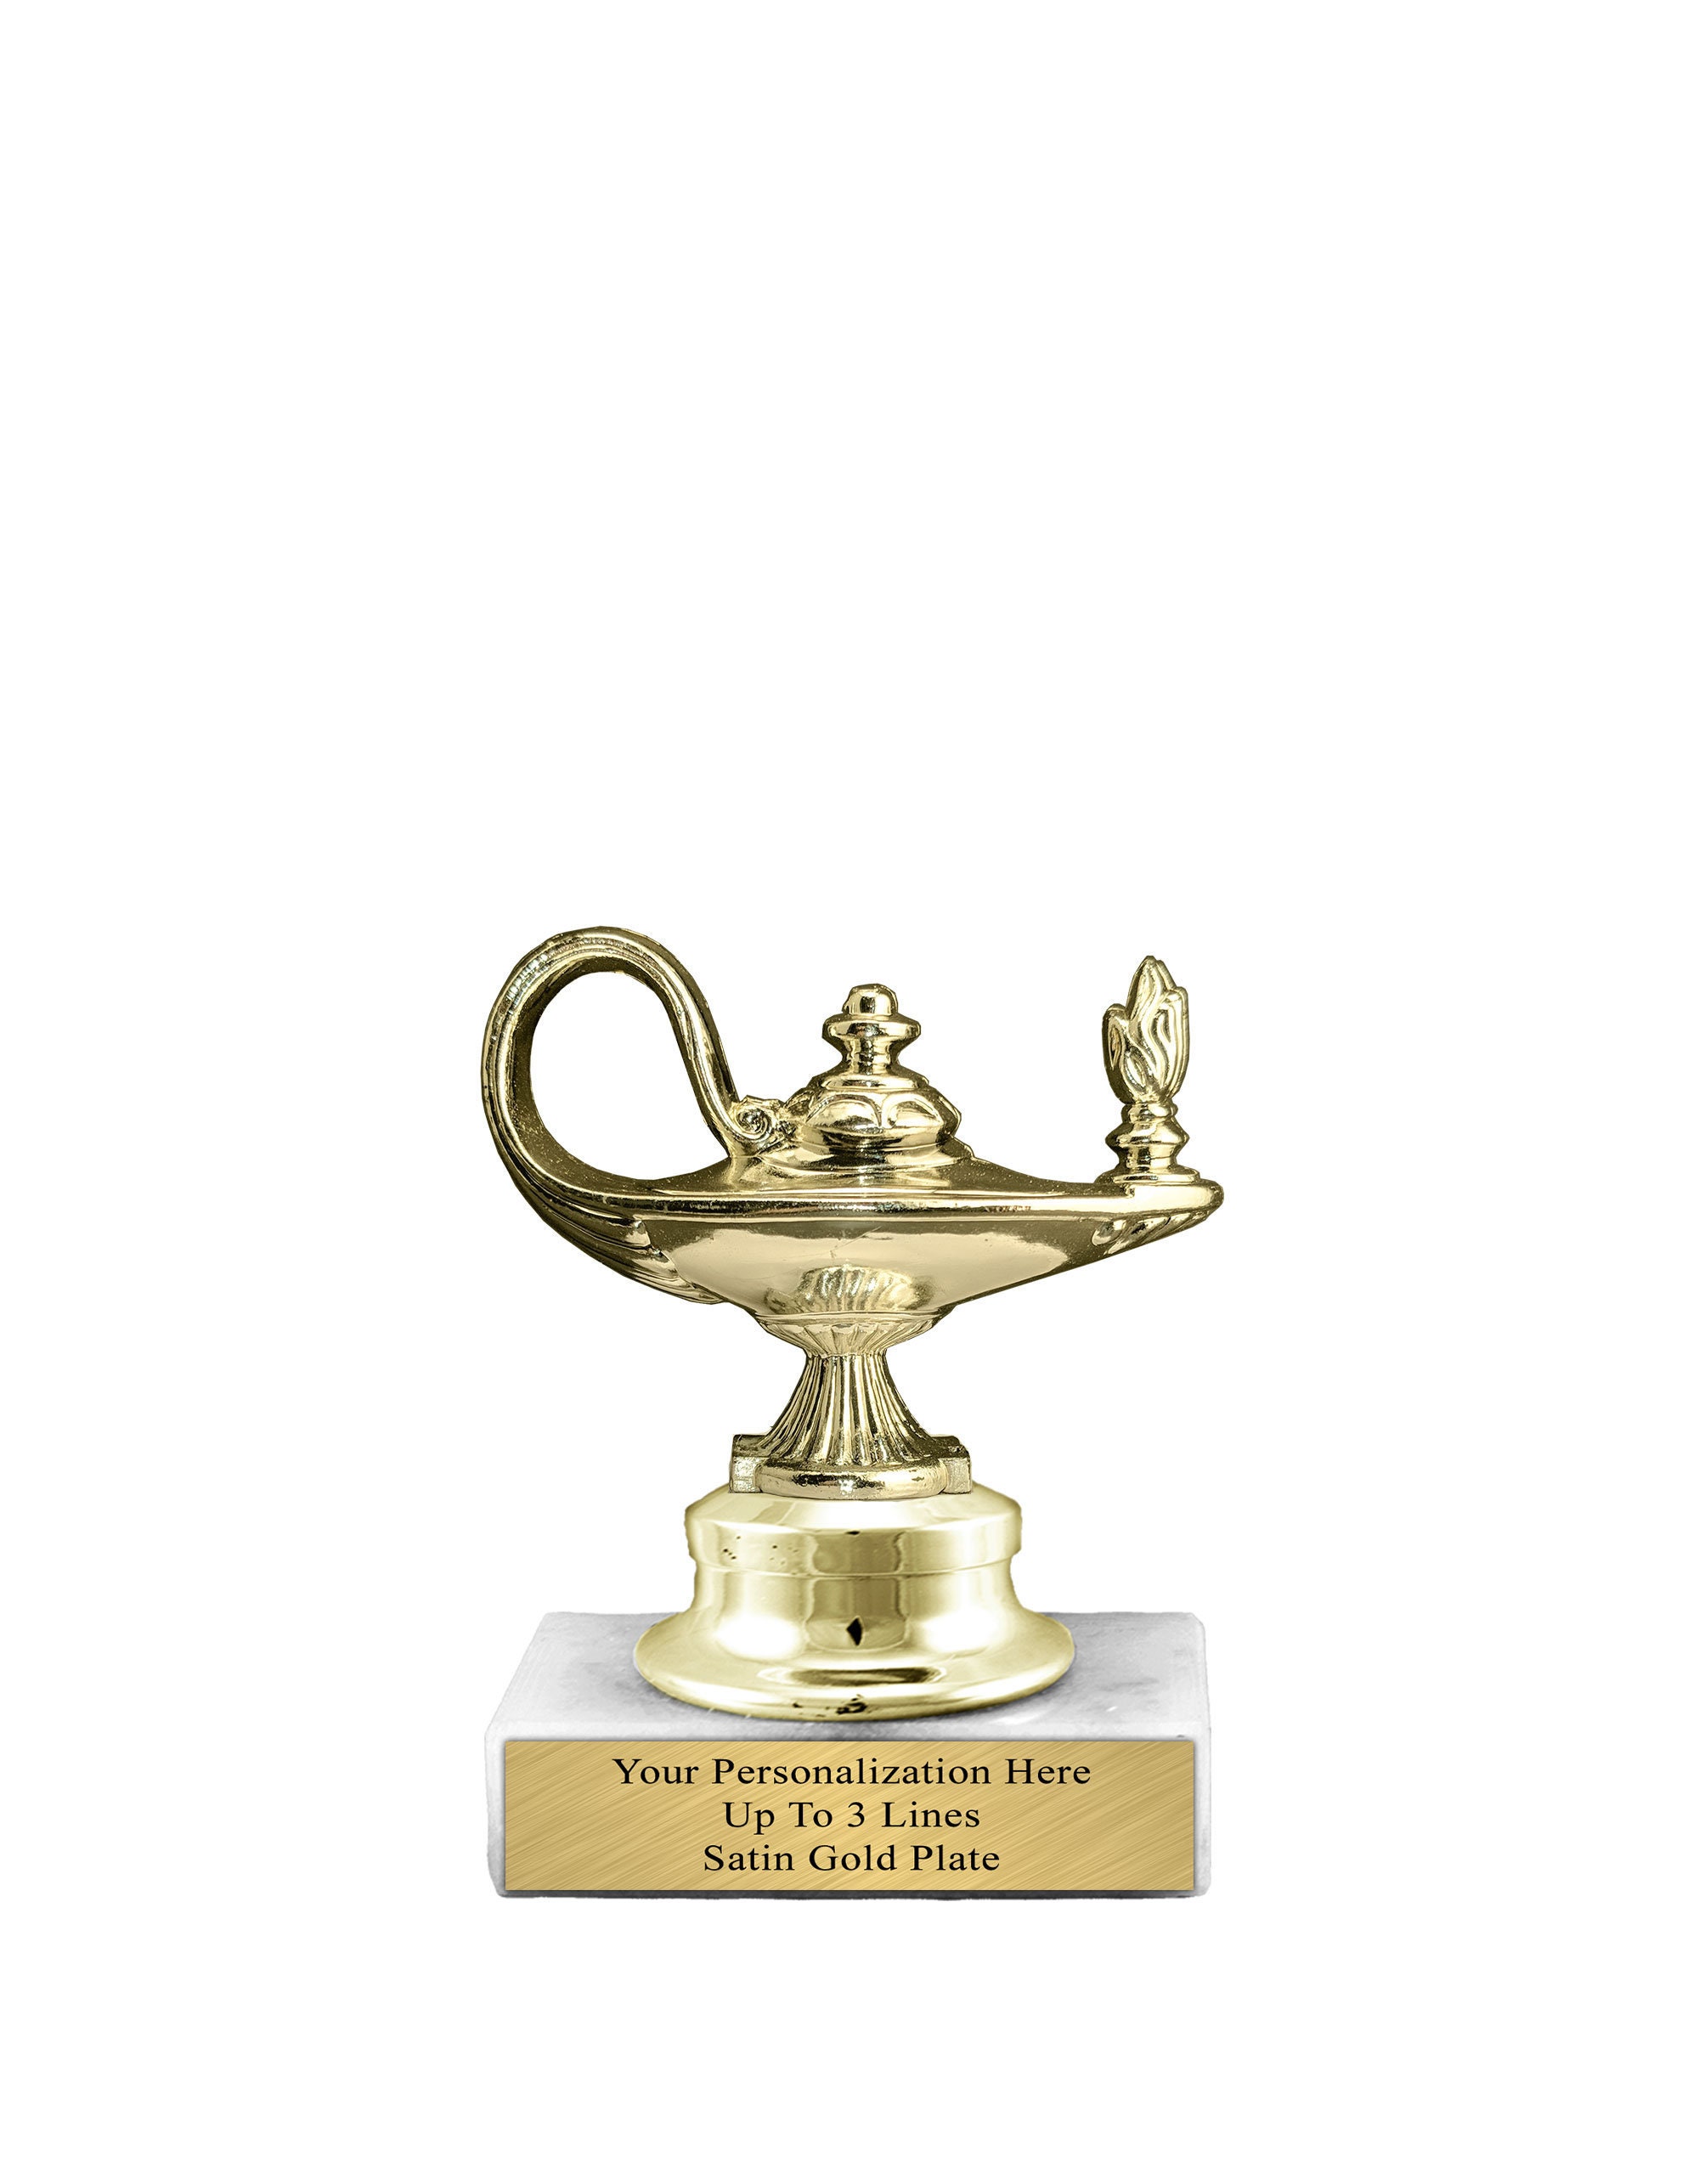 Case of 80, Crown Awards Marble Trophy Base 2 x 3 x 3/4 M-9705AGB White